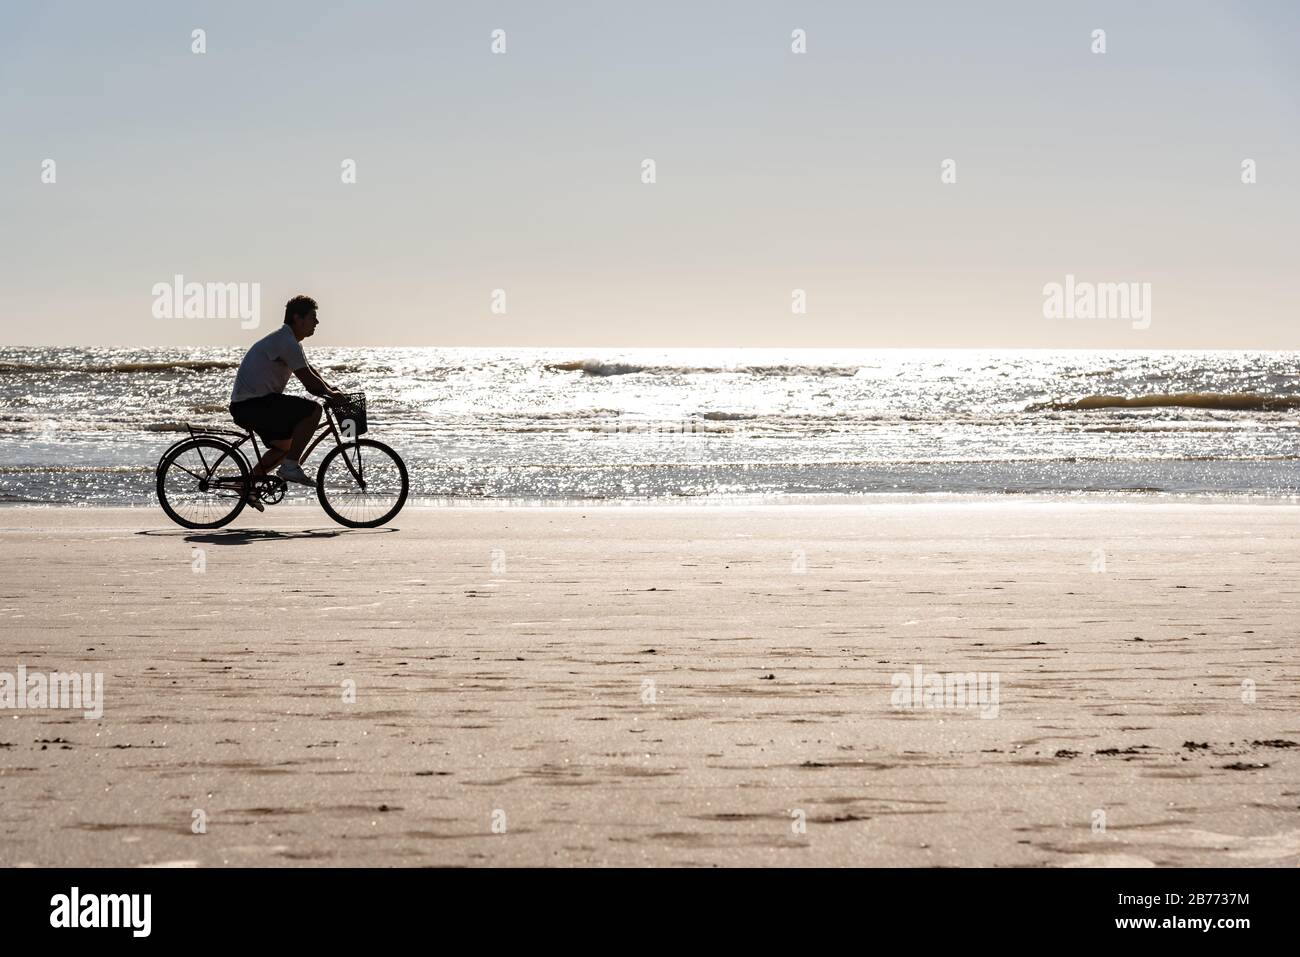 Silhouette of man riding bicycle on a beach with the sun reflecting in the sea and a clear sky Stock Photo